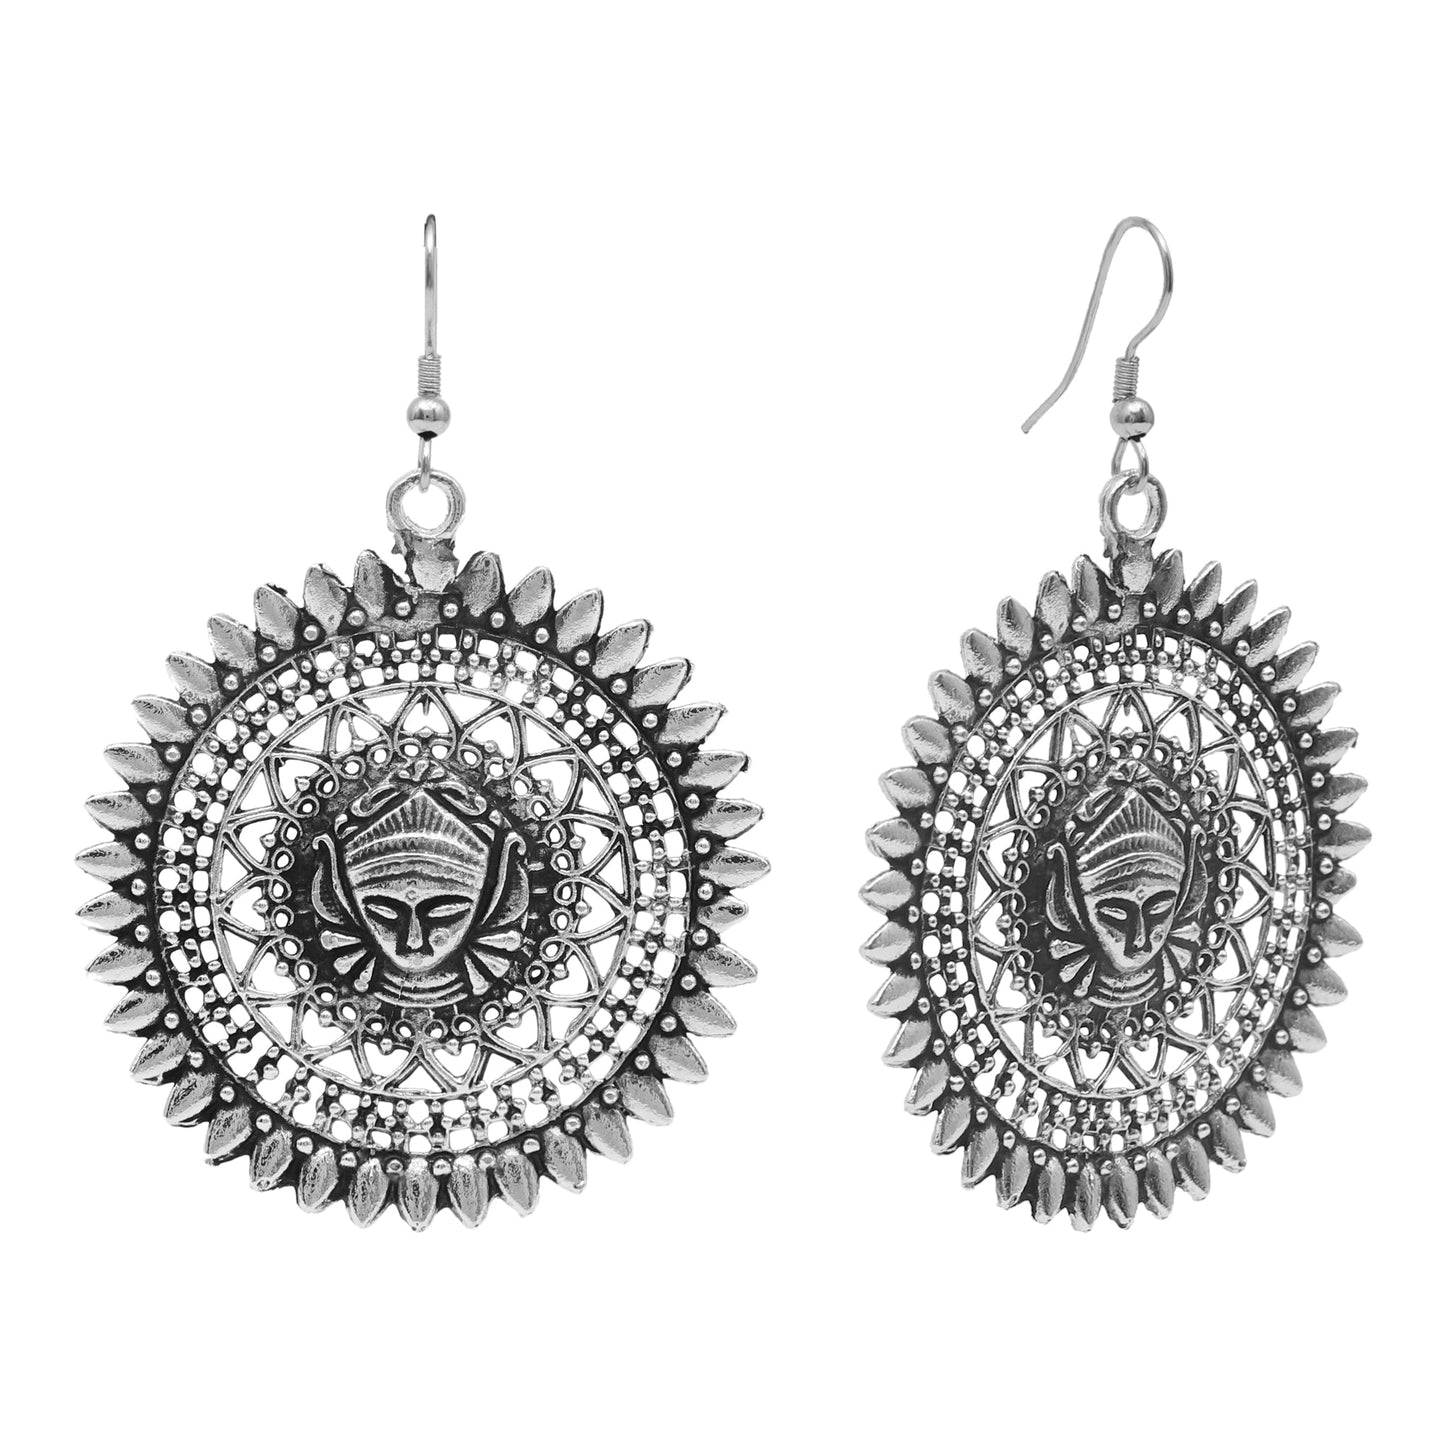 Oxidised Black Silver Lord Buddha Temple Stylish Hoop and Bali Earring for Girls and Women (SJ_1729)